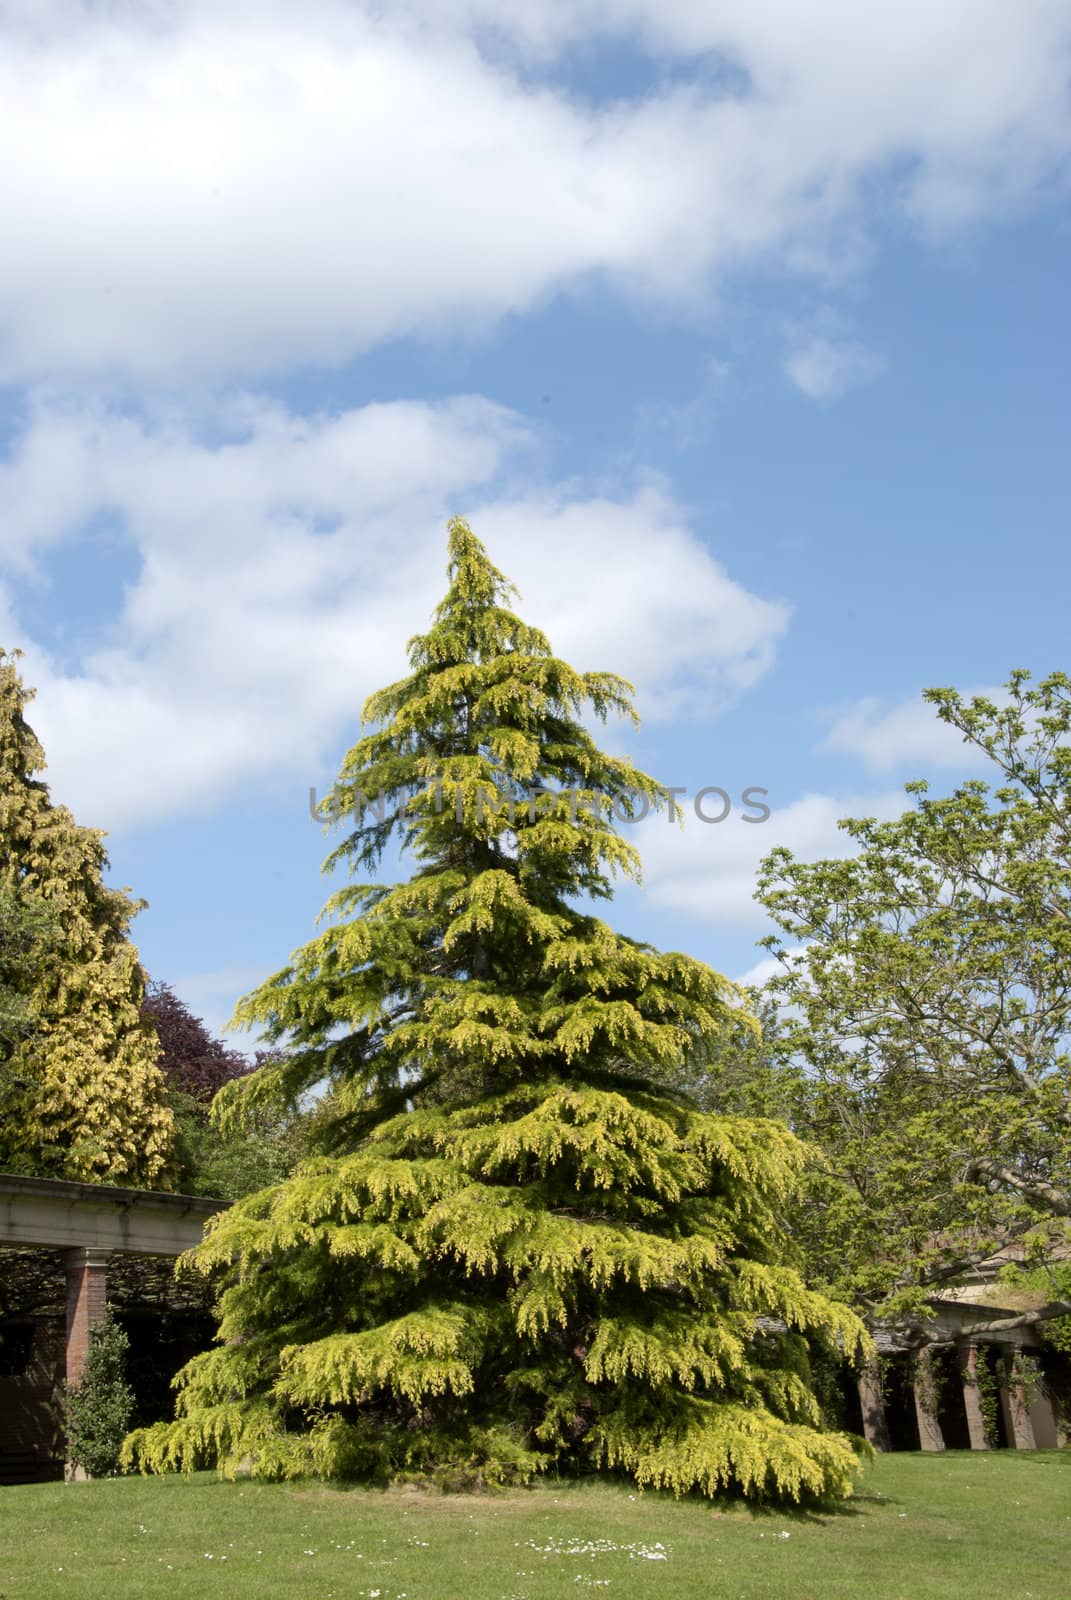 Conifer Tree by d40xboy